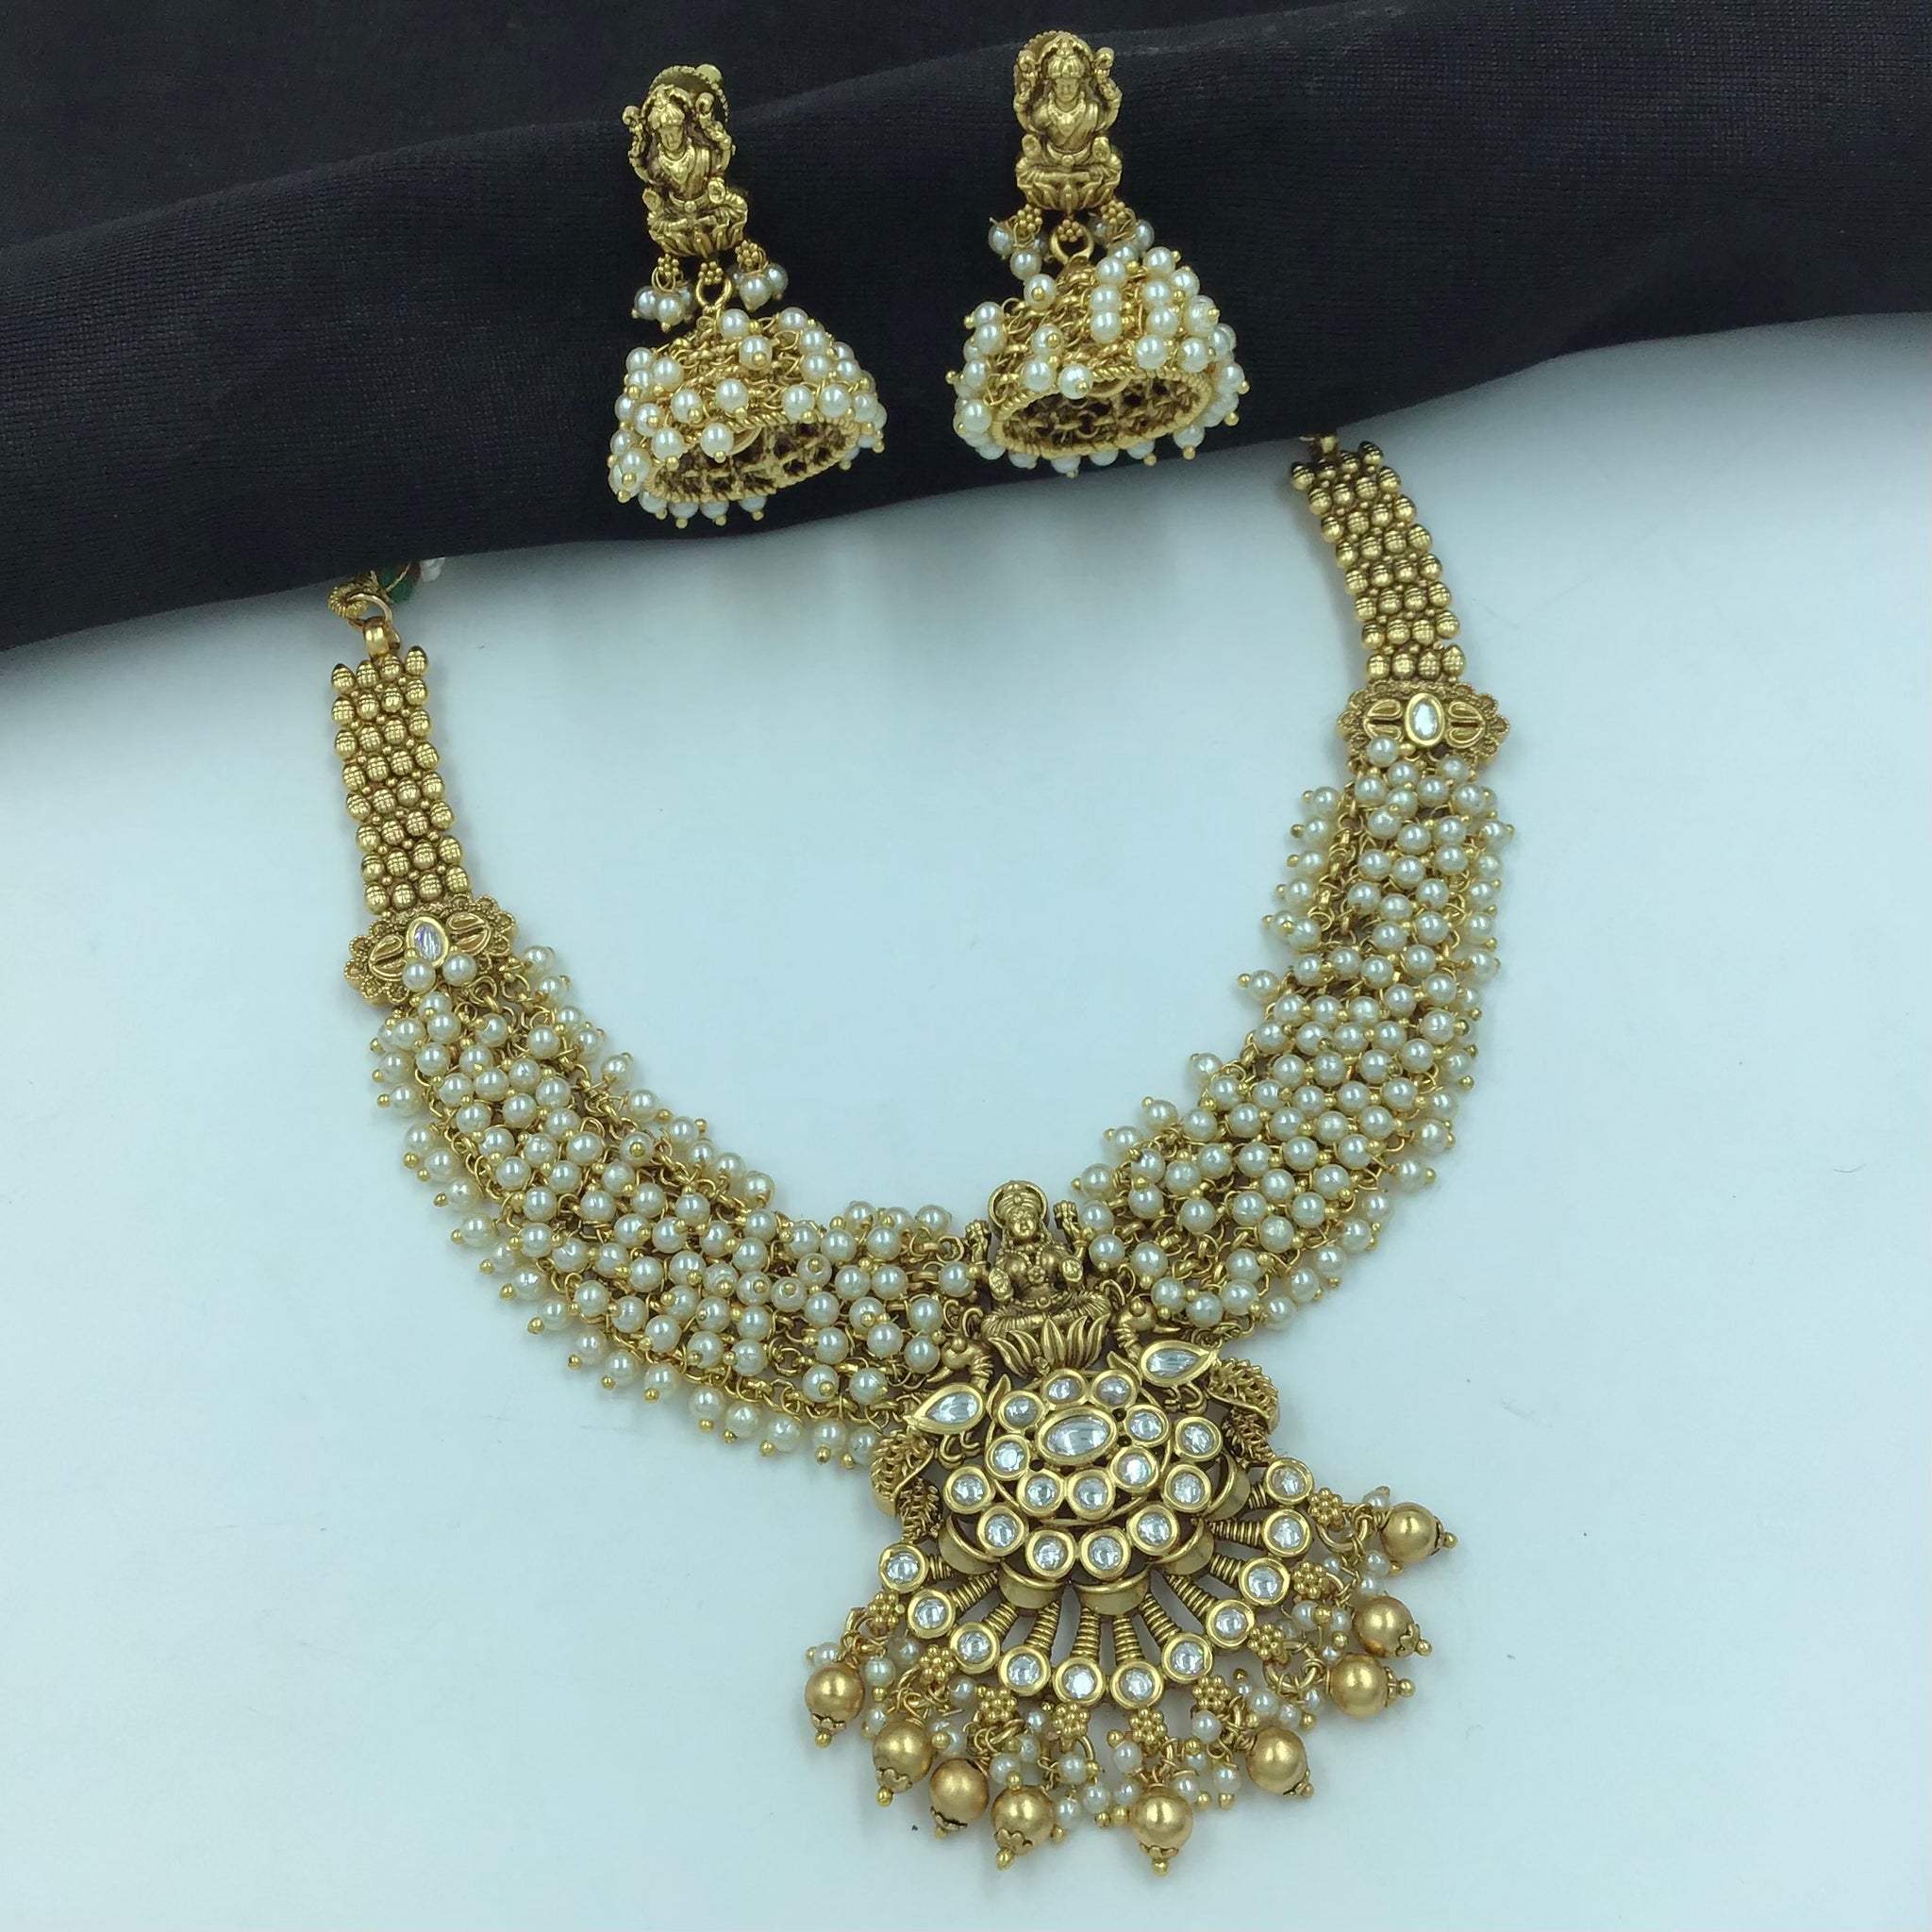 Antique Gold Plated Round Neck Temple Necklace Set 9993-28